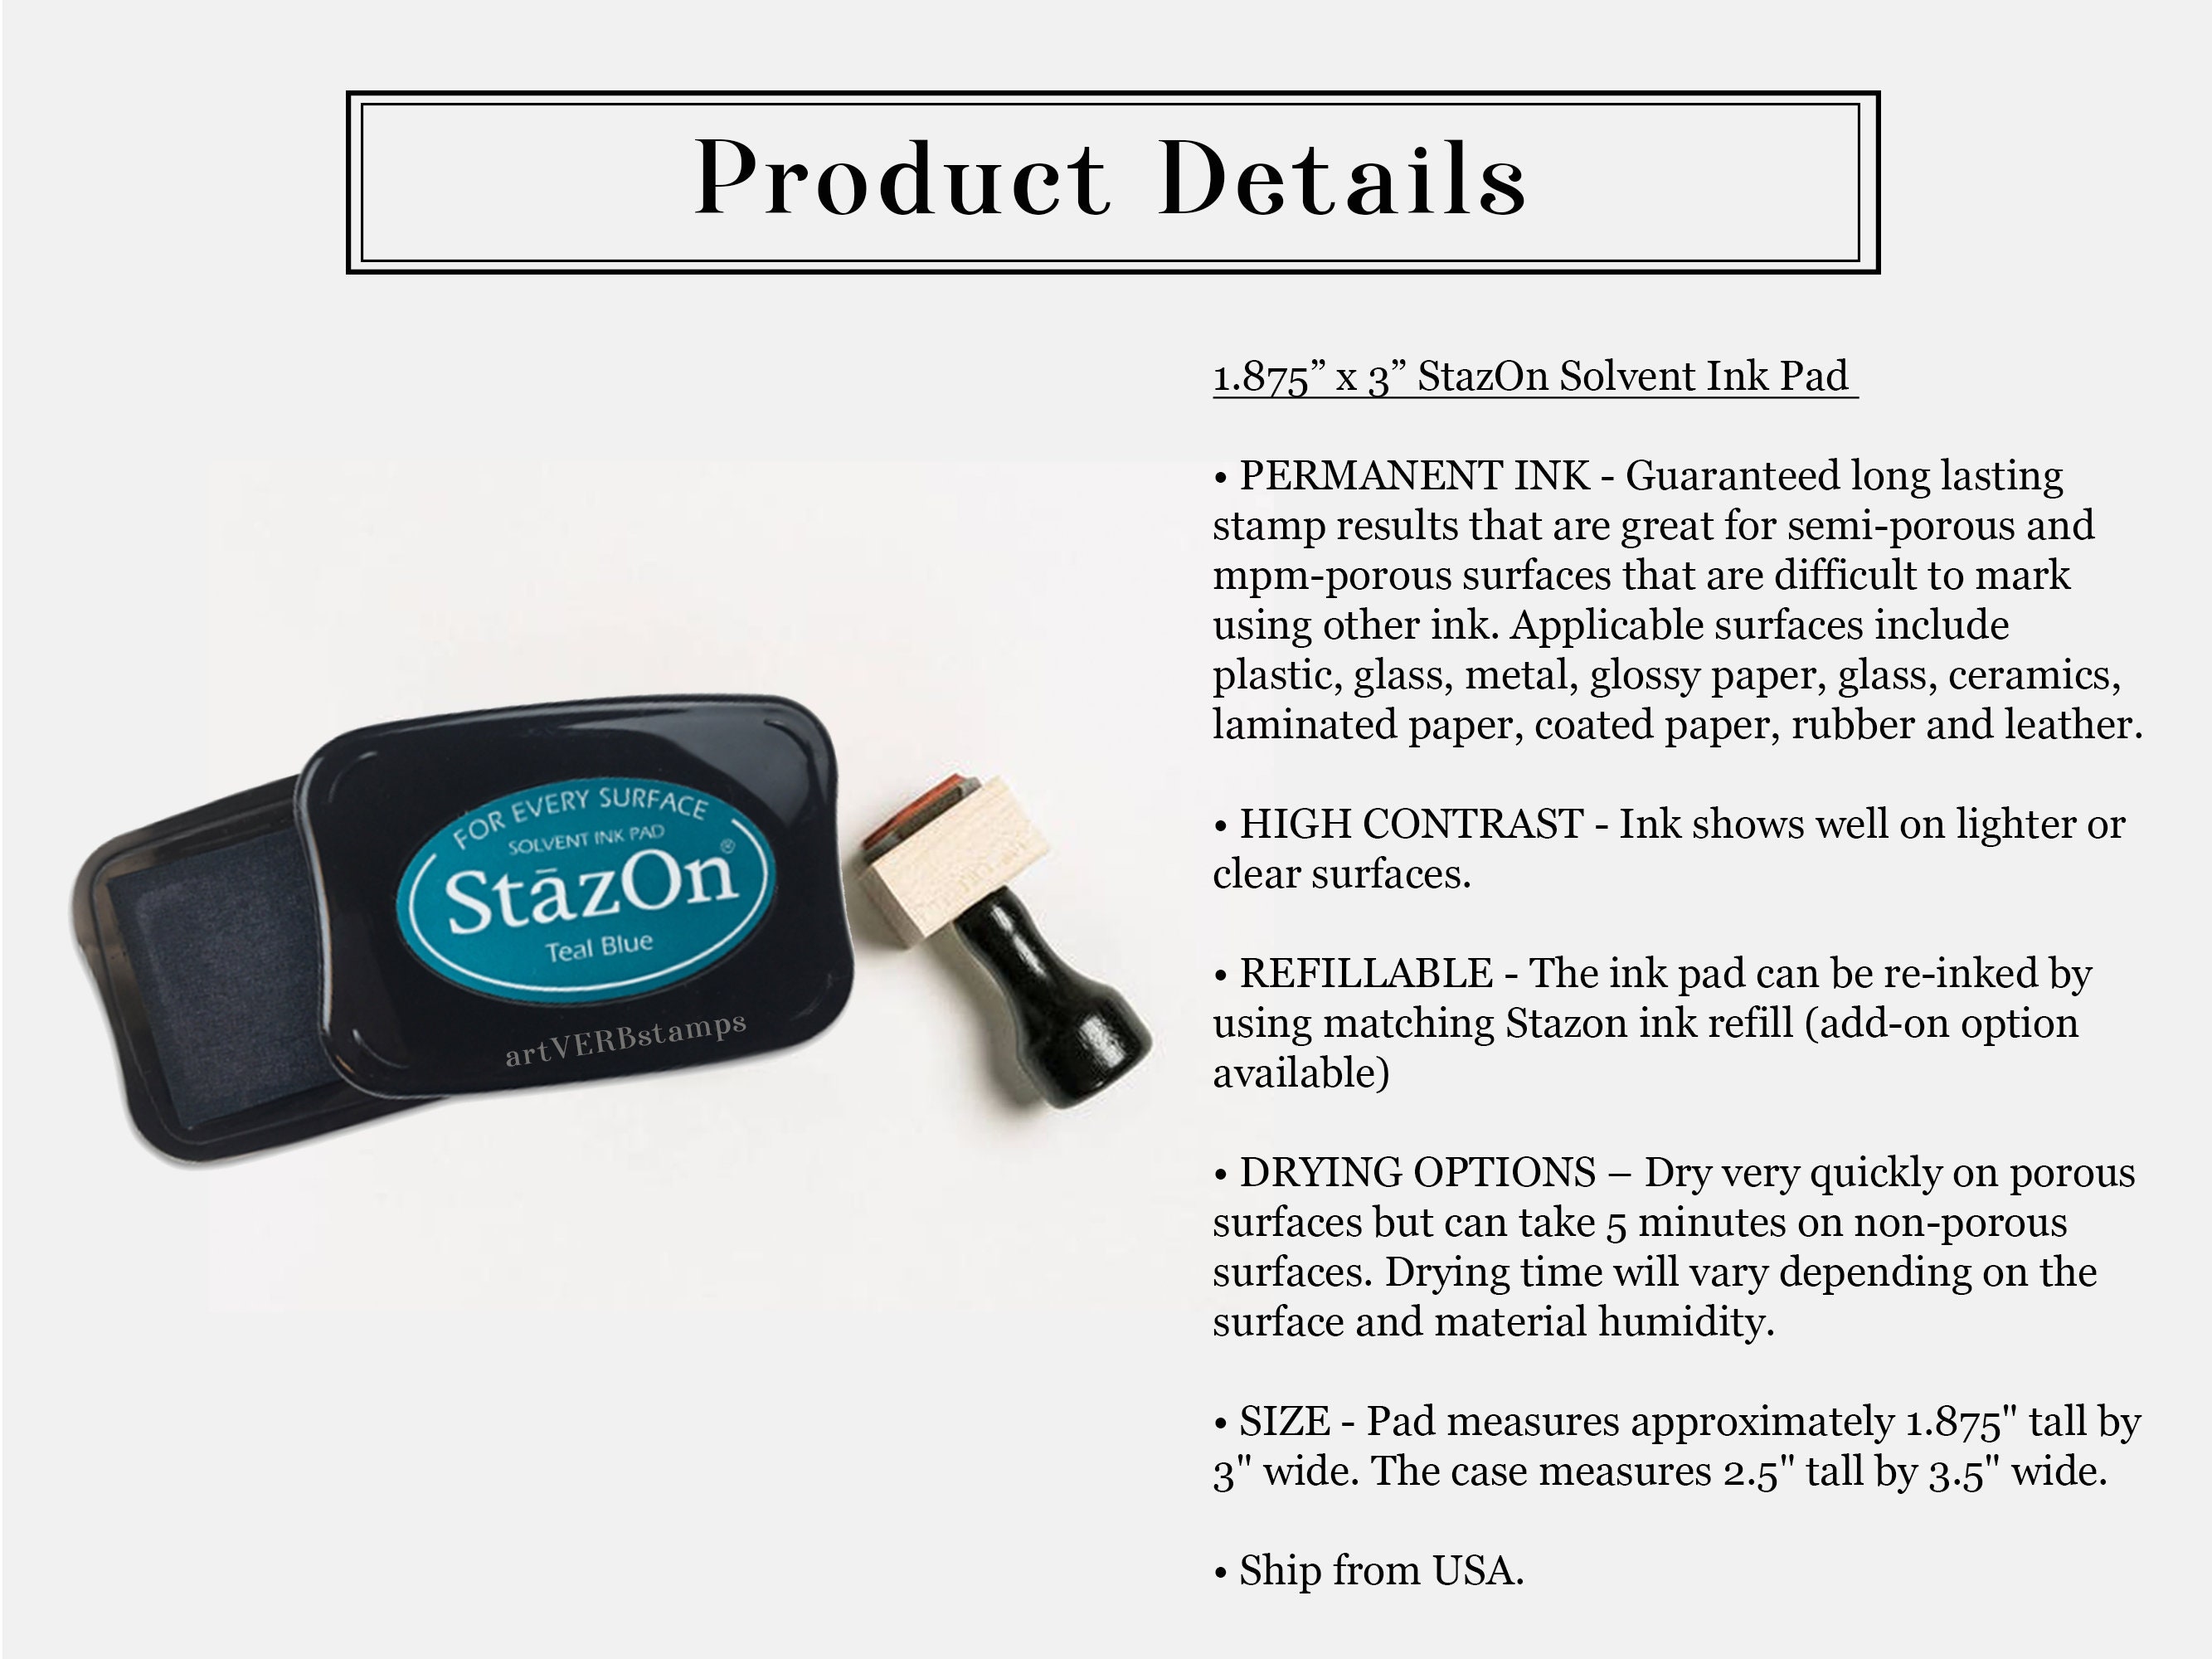 StazOn Solvent Ink Pad, Rubber Stamp Ink for Plastics and Leather